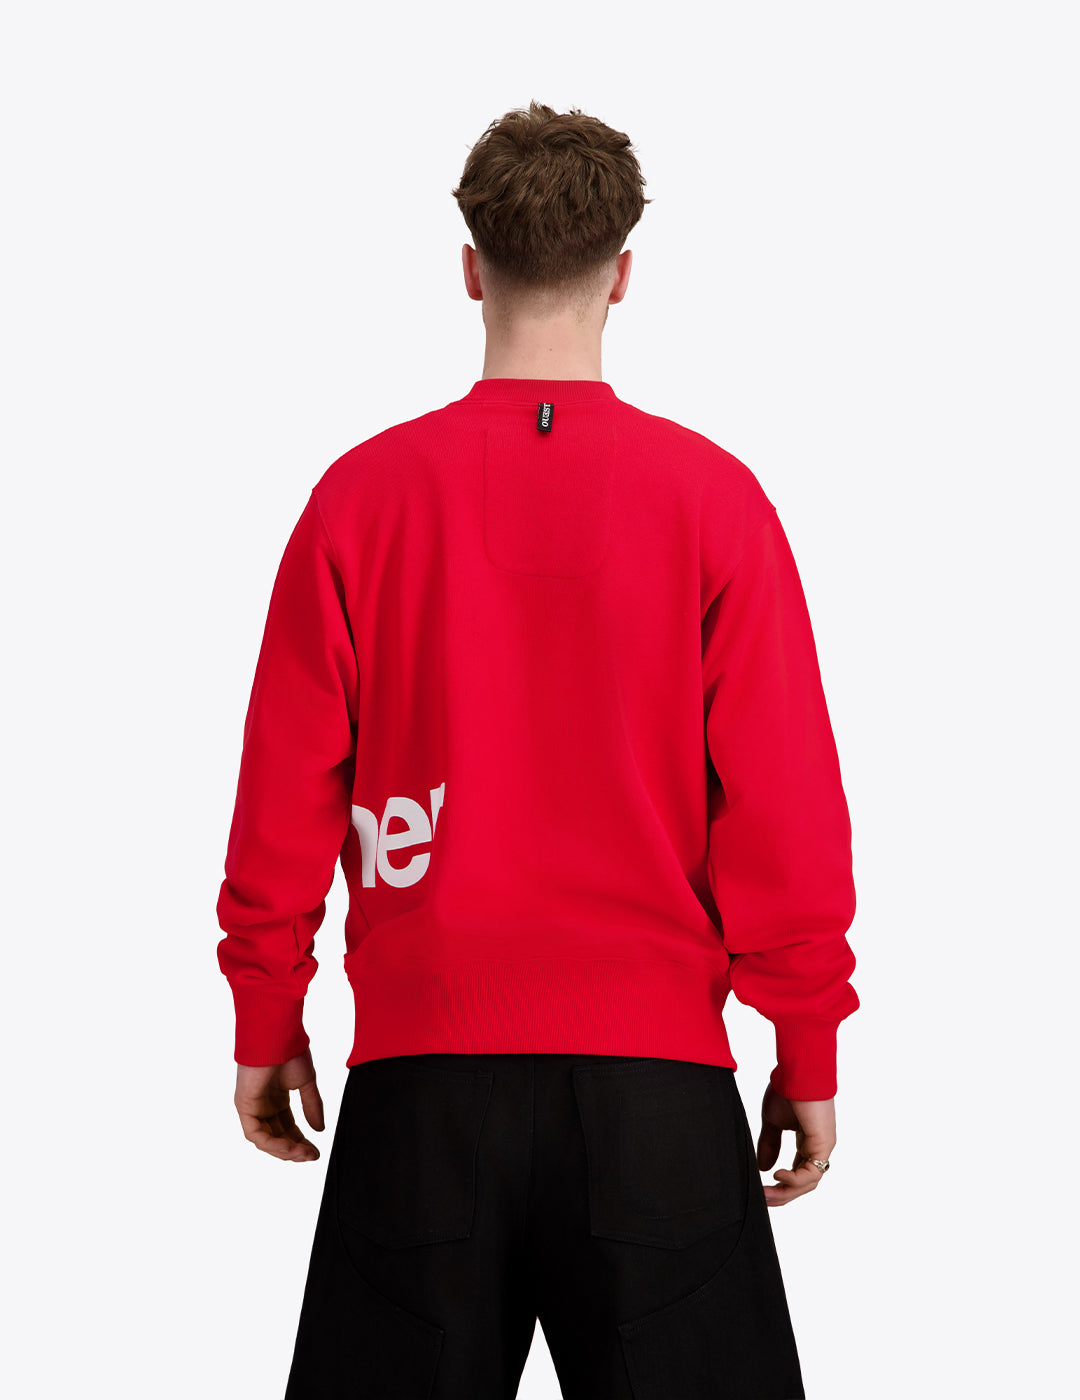 THE "COME TOGETHER" CREWNECK